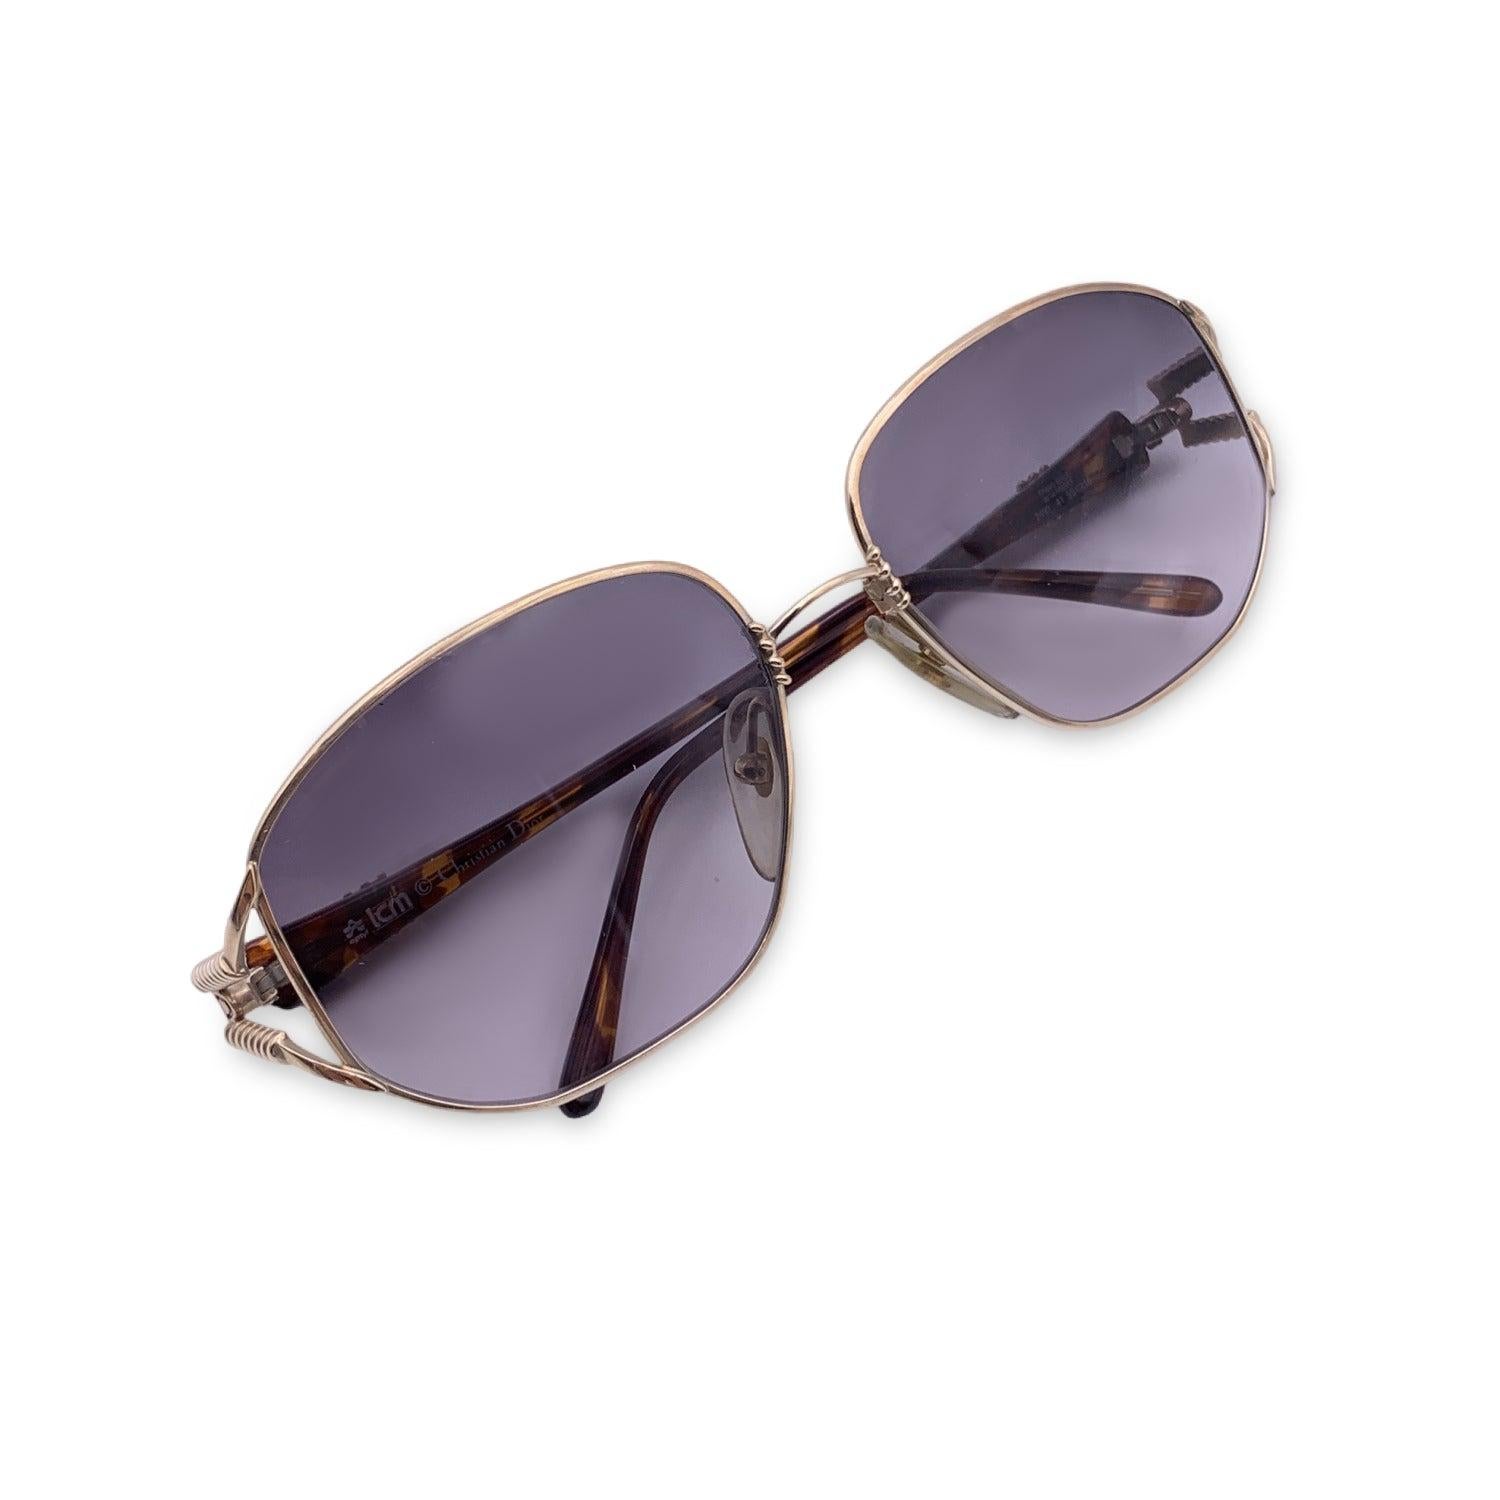 Vintage Christian Dior Women sunglasses, Mod. 2492 41 Optyl. Size: 55/16 120 mm. Gold metal frame with brown acetate temples. Oval design. 100% Total UVA/UVB protection gradient lenses in grey color. CD logo on temples. Details MATERIAL: Metal